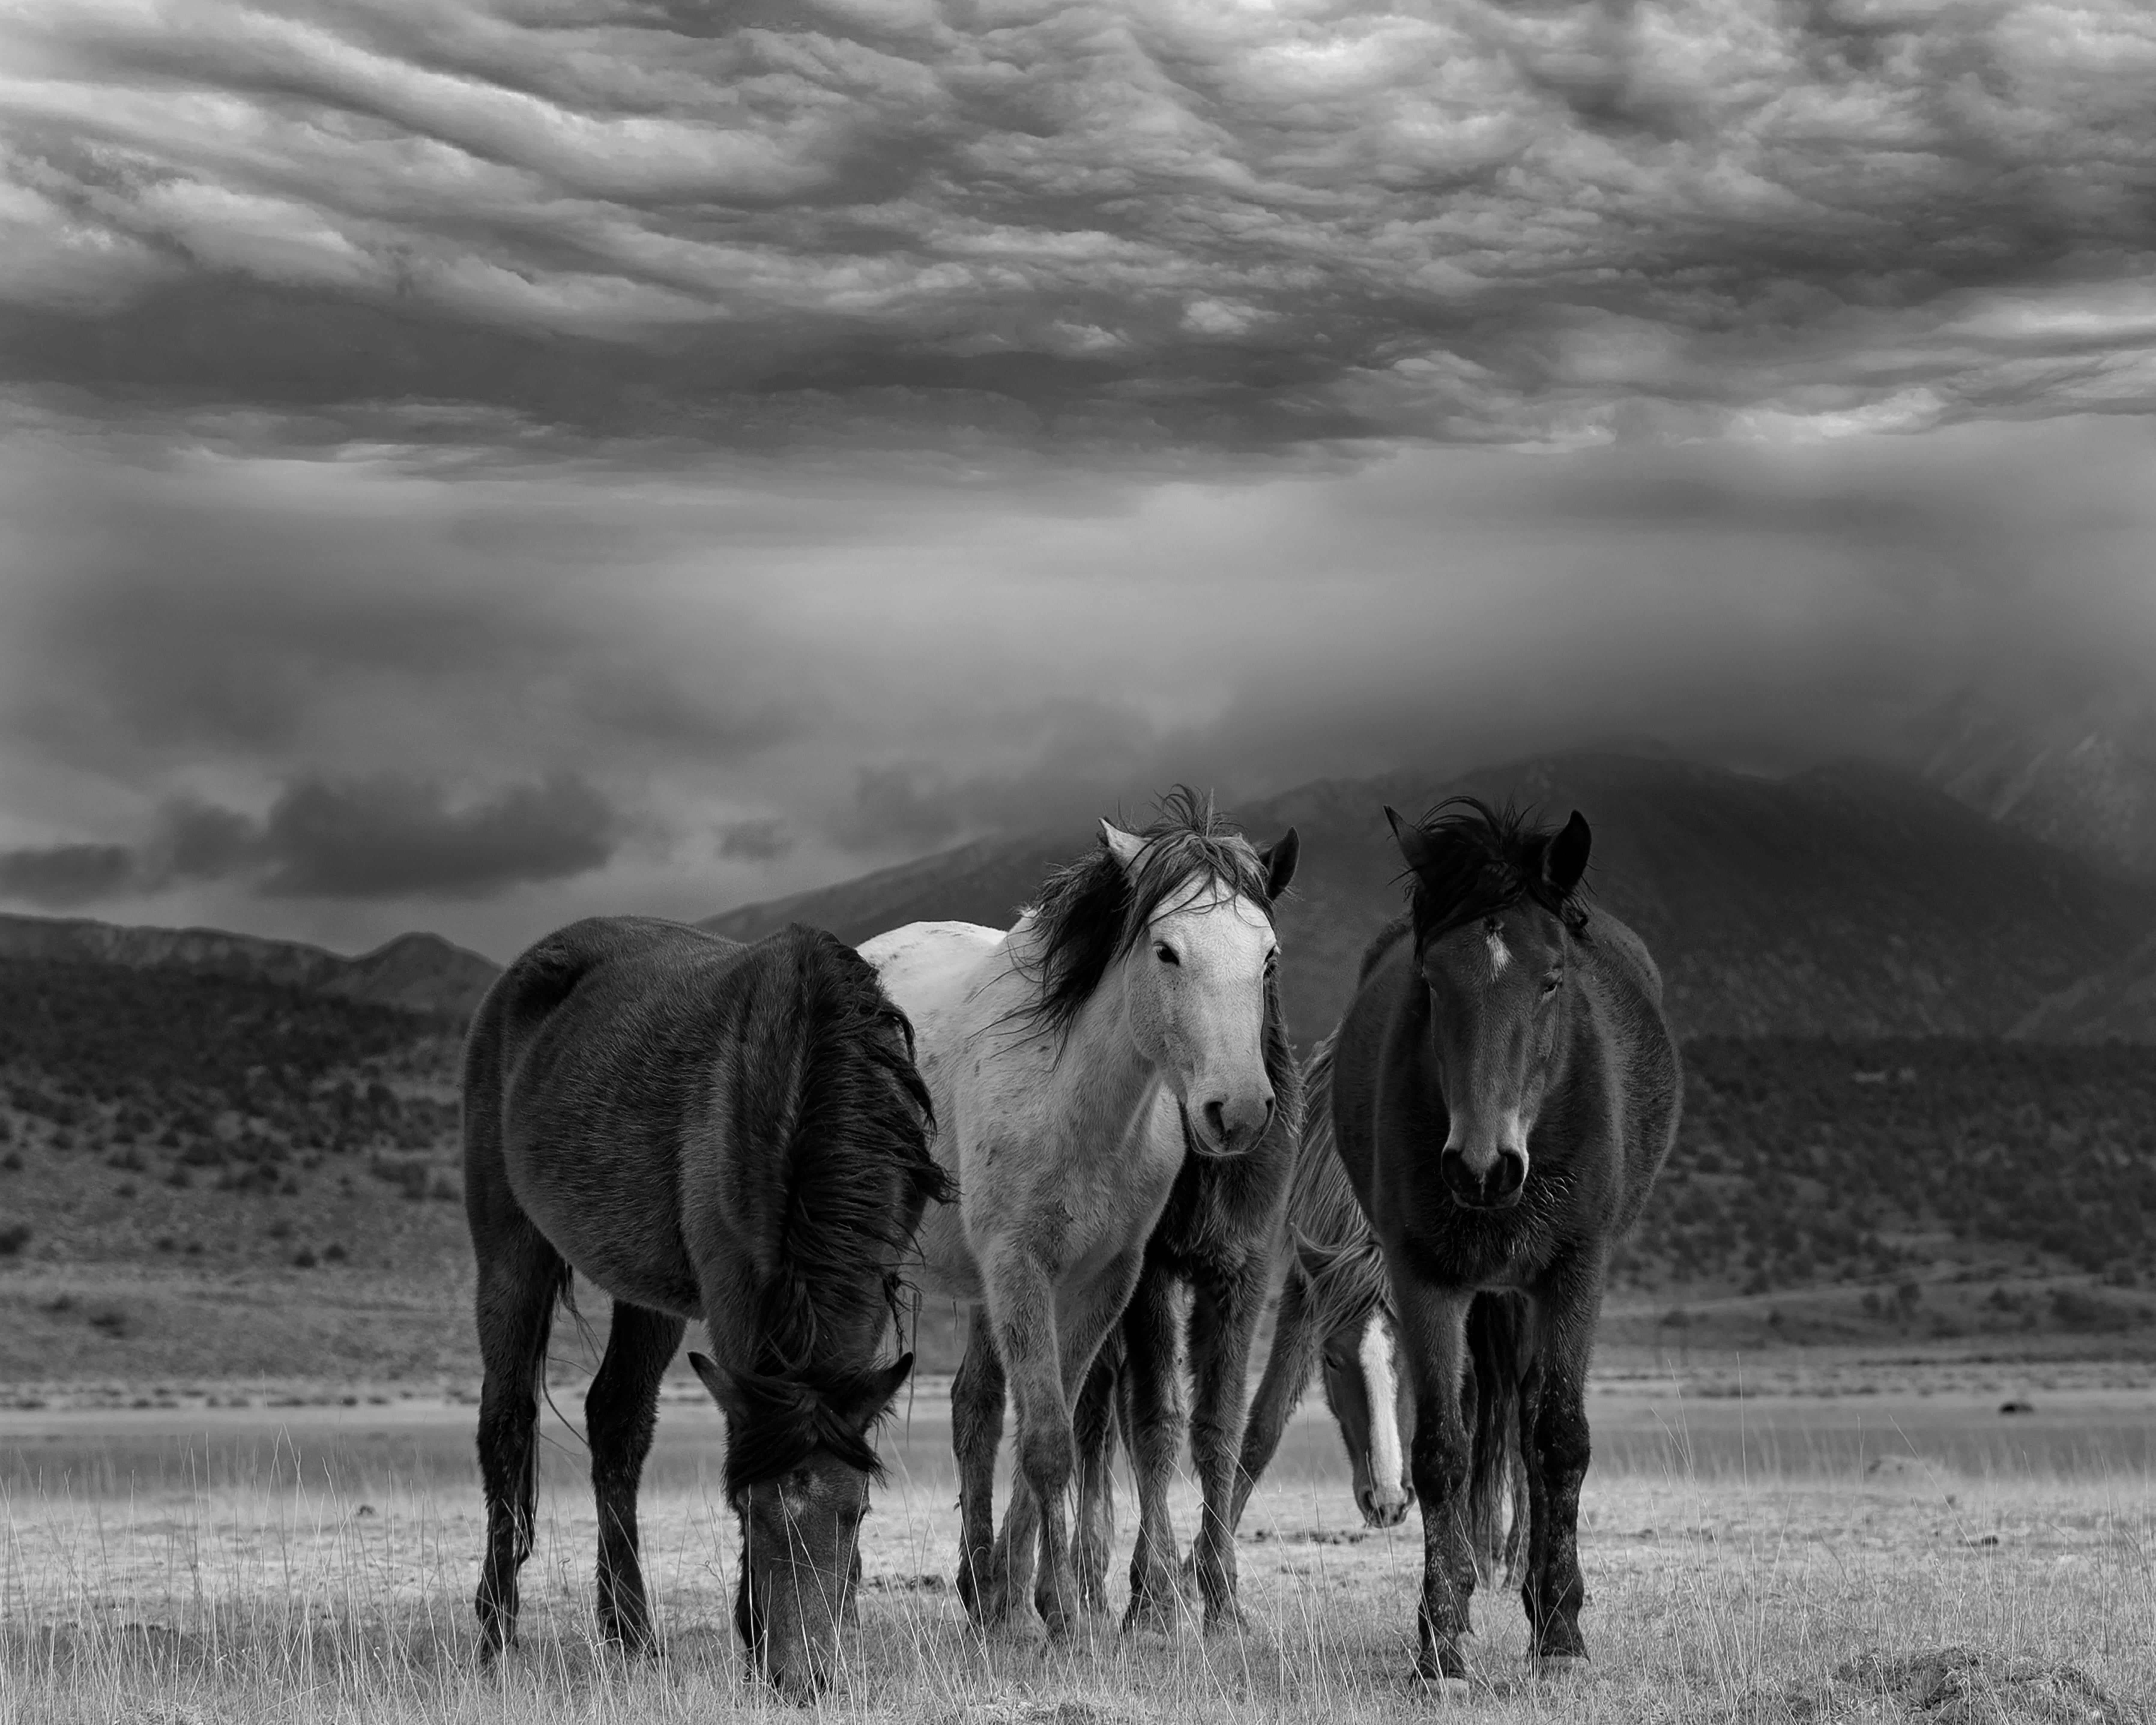 Shane Russeck Animal Print - "Dust and Horses" 40x50 Black and White Photography Wild Horses Mustangs Photo